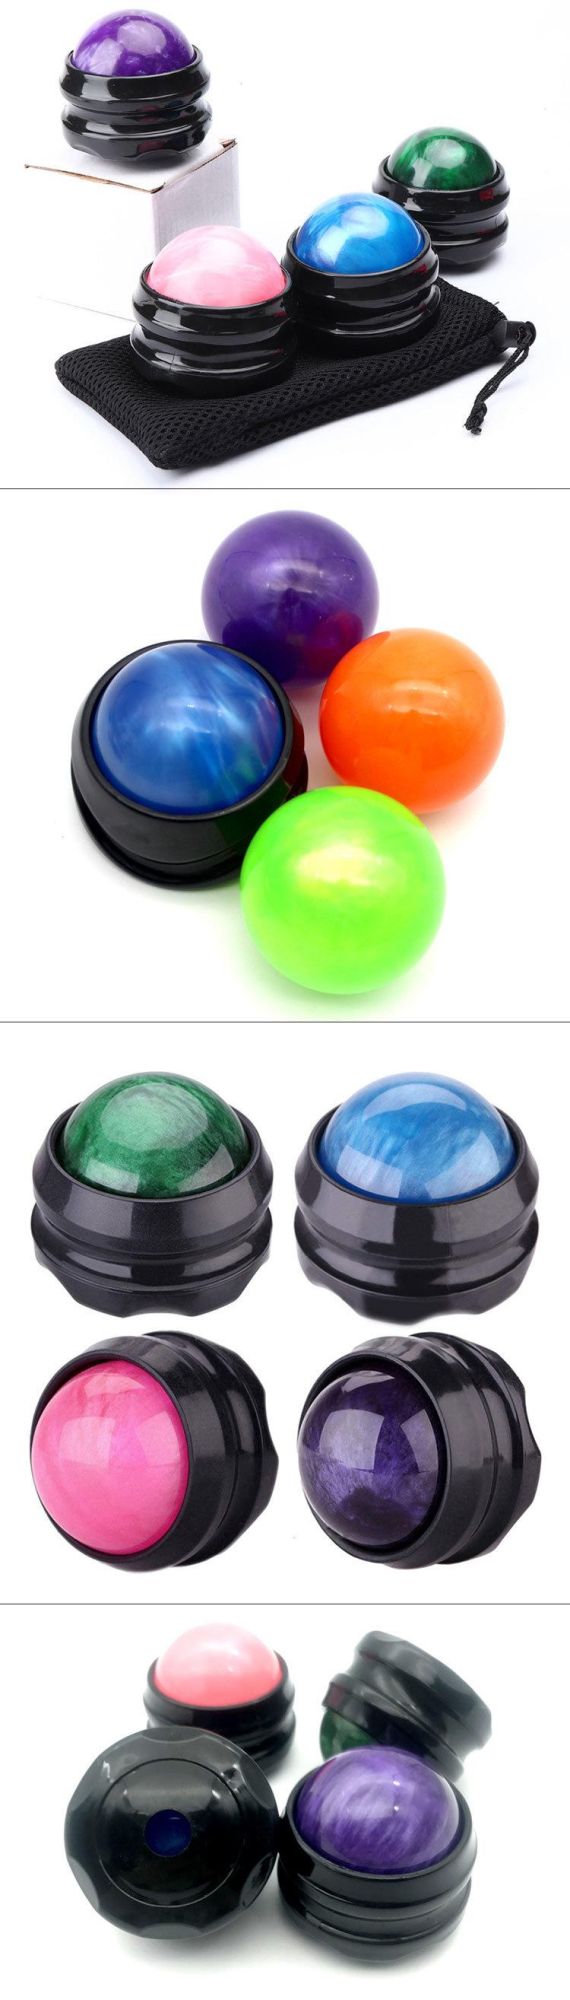 Hot Customized Products Resin Massage Roller Ball for Body Relief